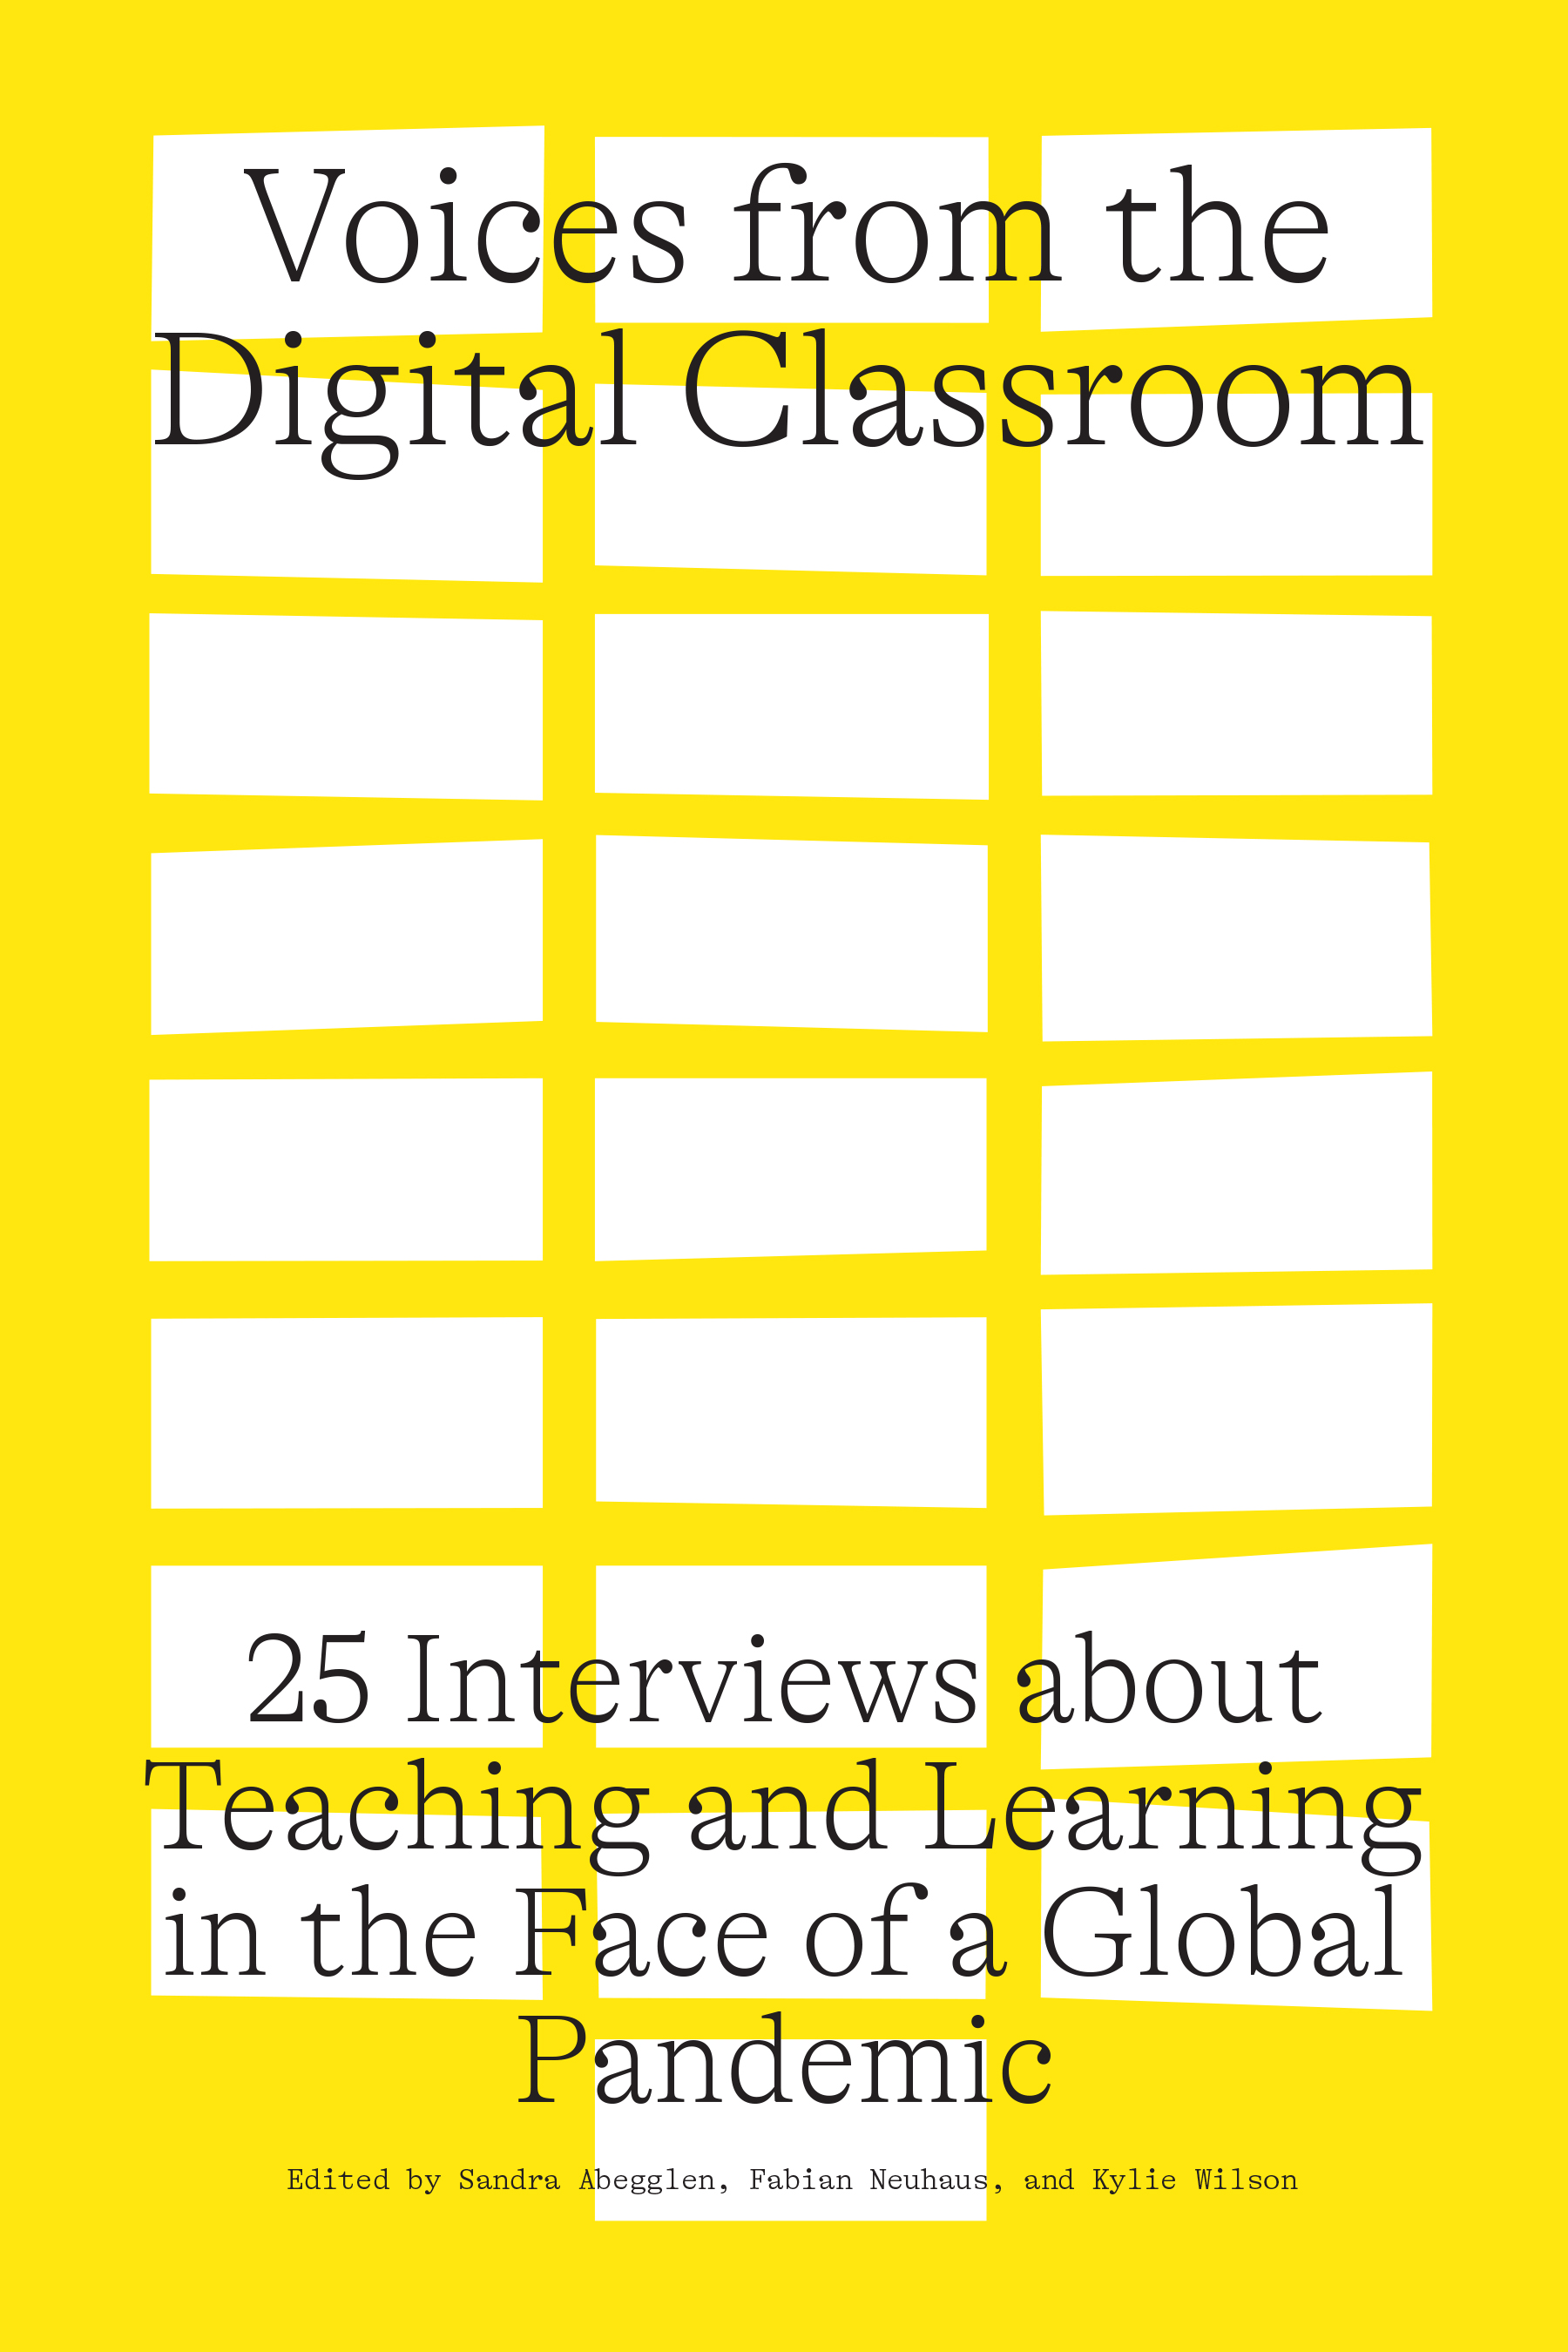 Book Cover Image for: Voices from the Digital Classroom